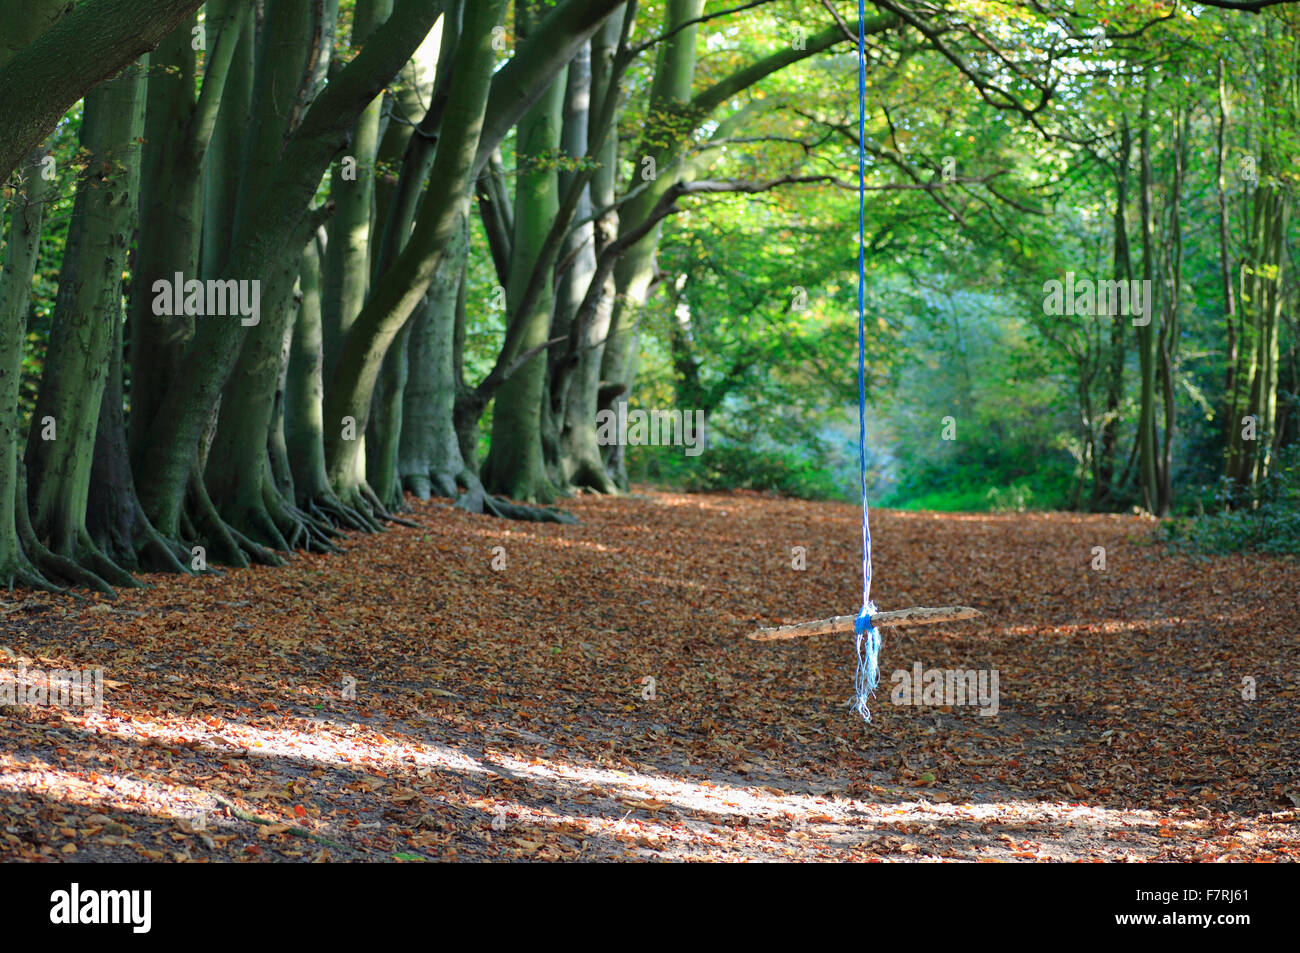 A rope swing in the woods. Stock Photo